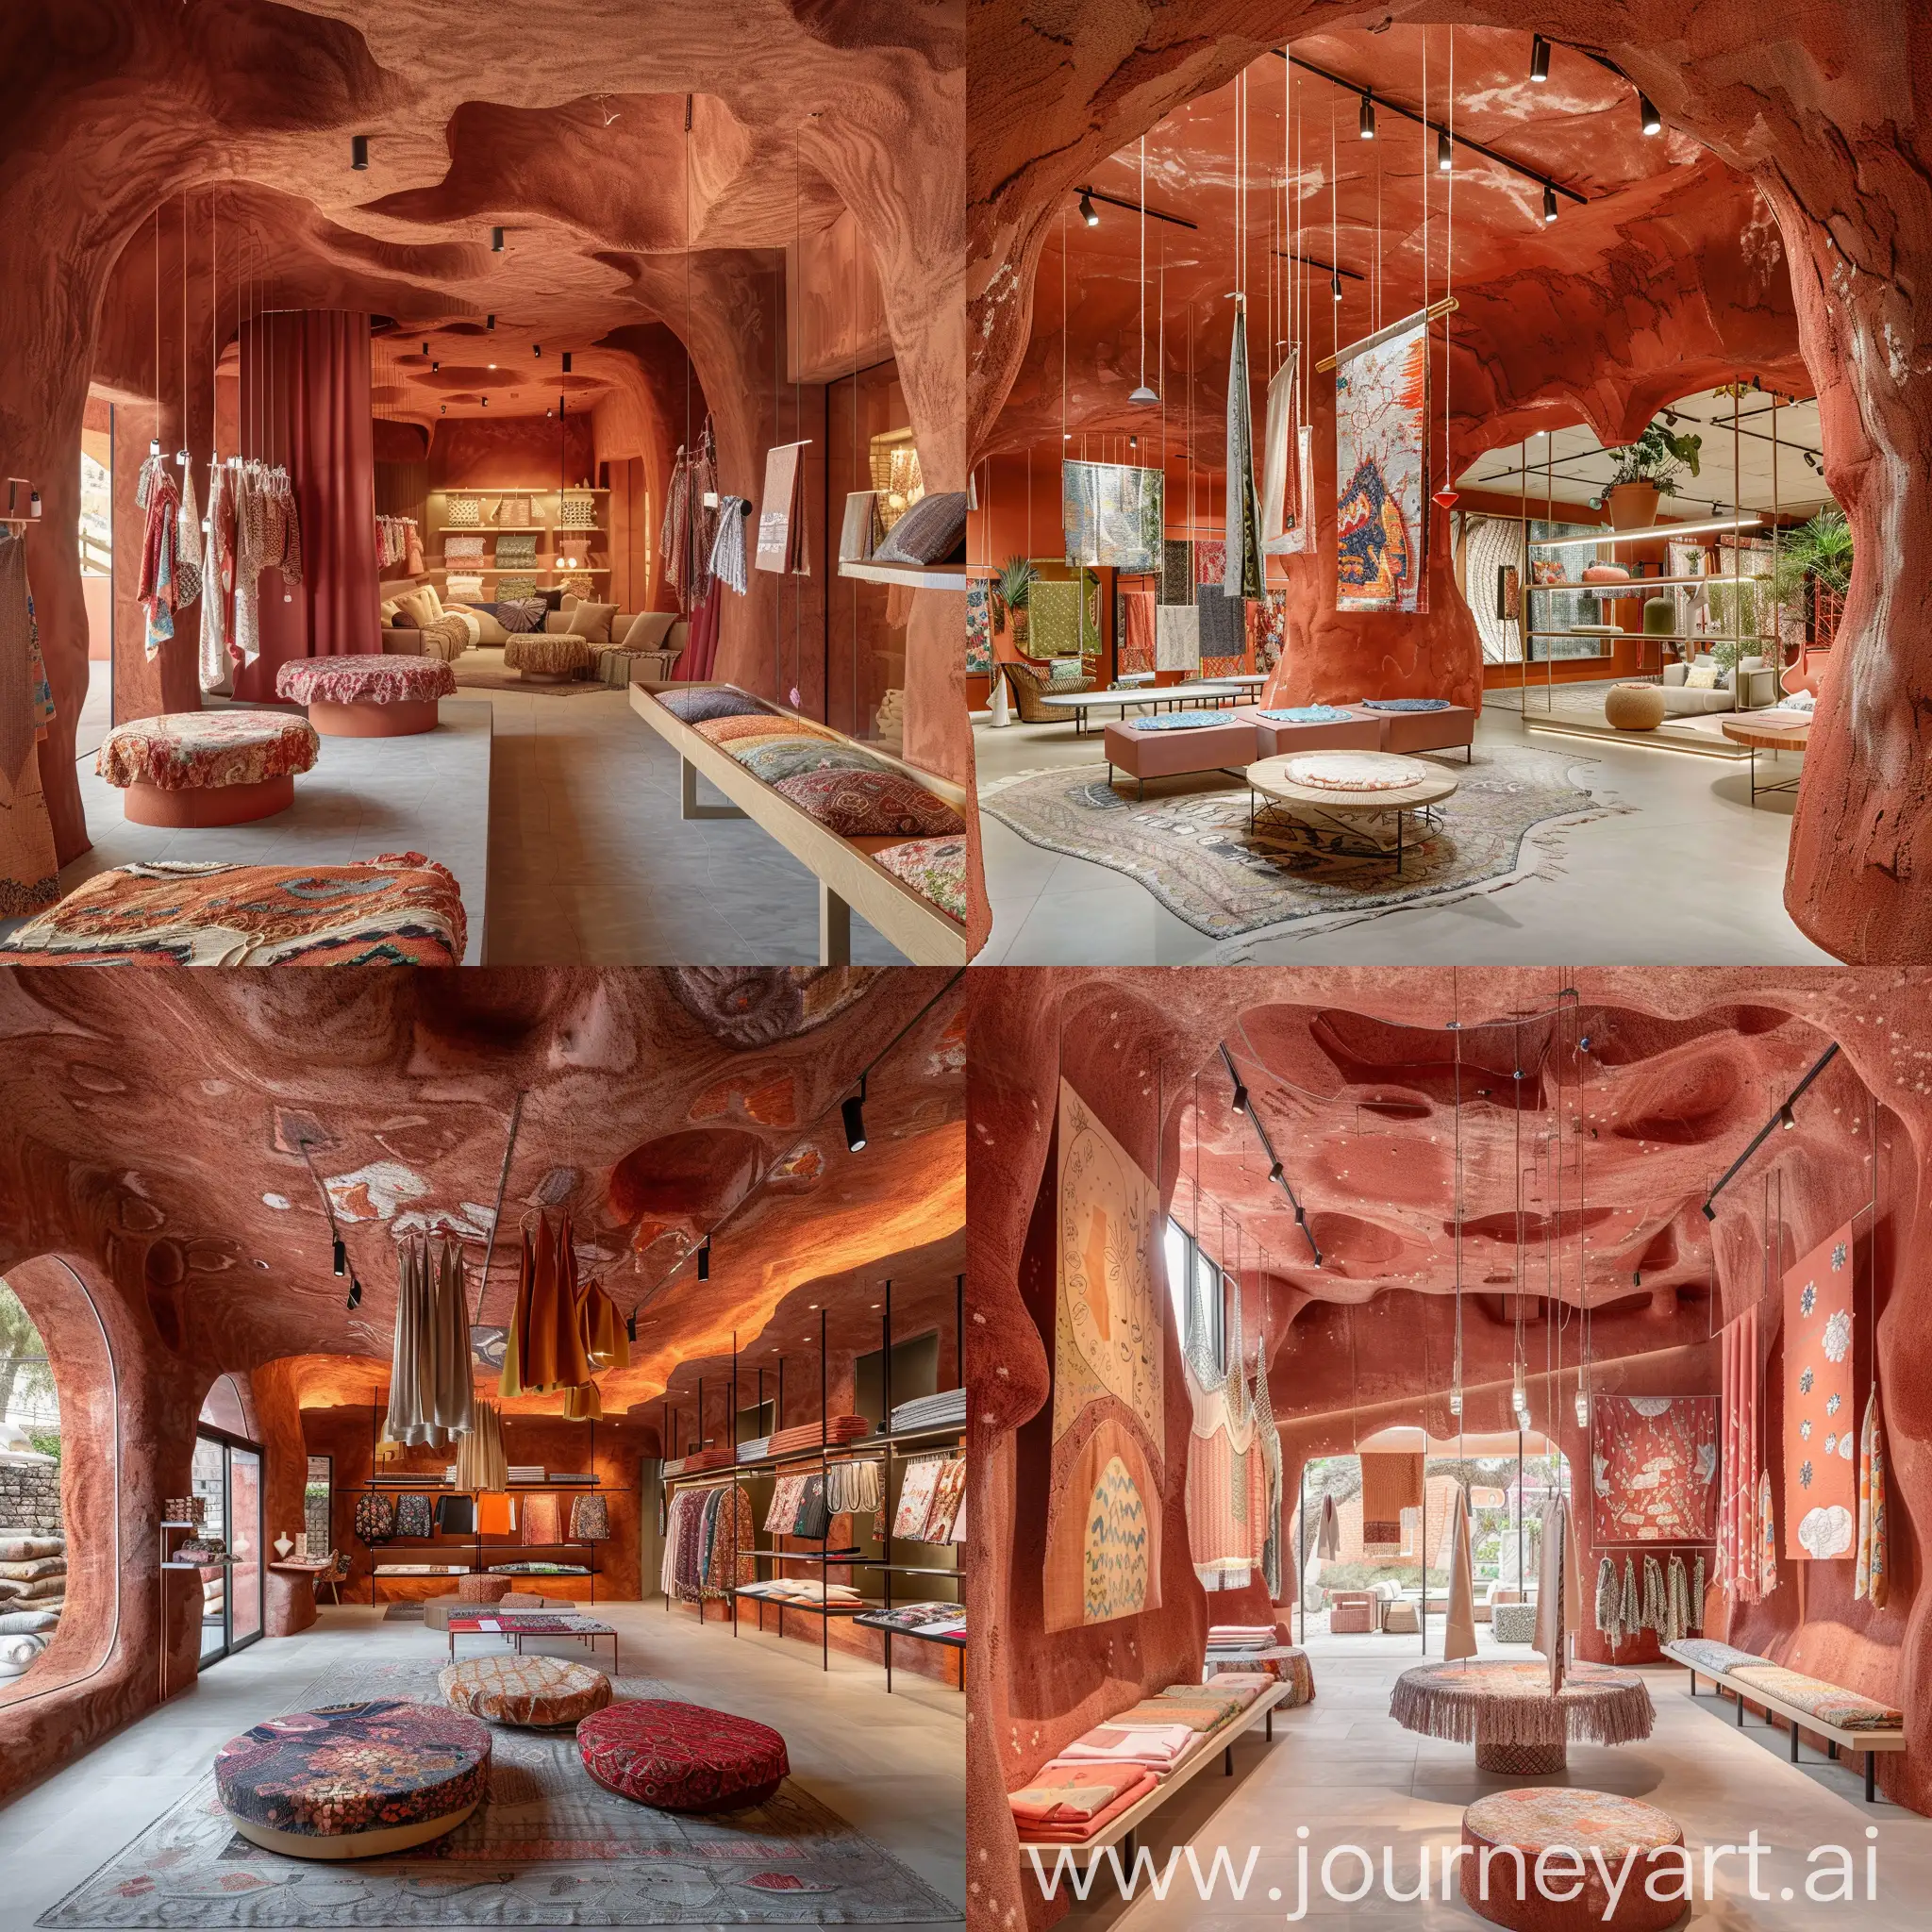 Fabric showroom with a modern cave concept with red terracota color scheme, clay plaster ceiling, that has hanging fabric display, fabric table display and a seating area in the space.